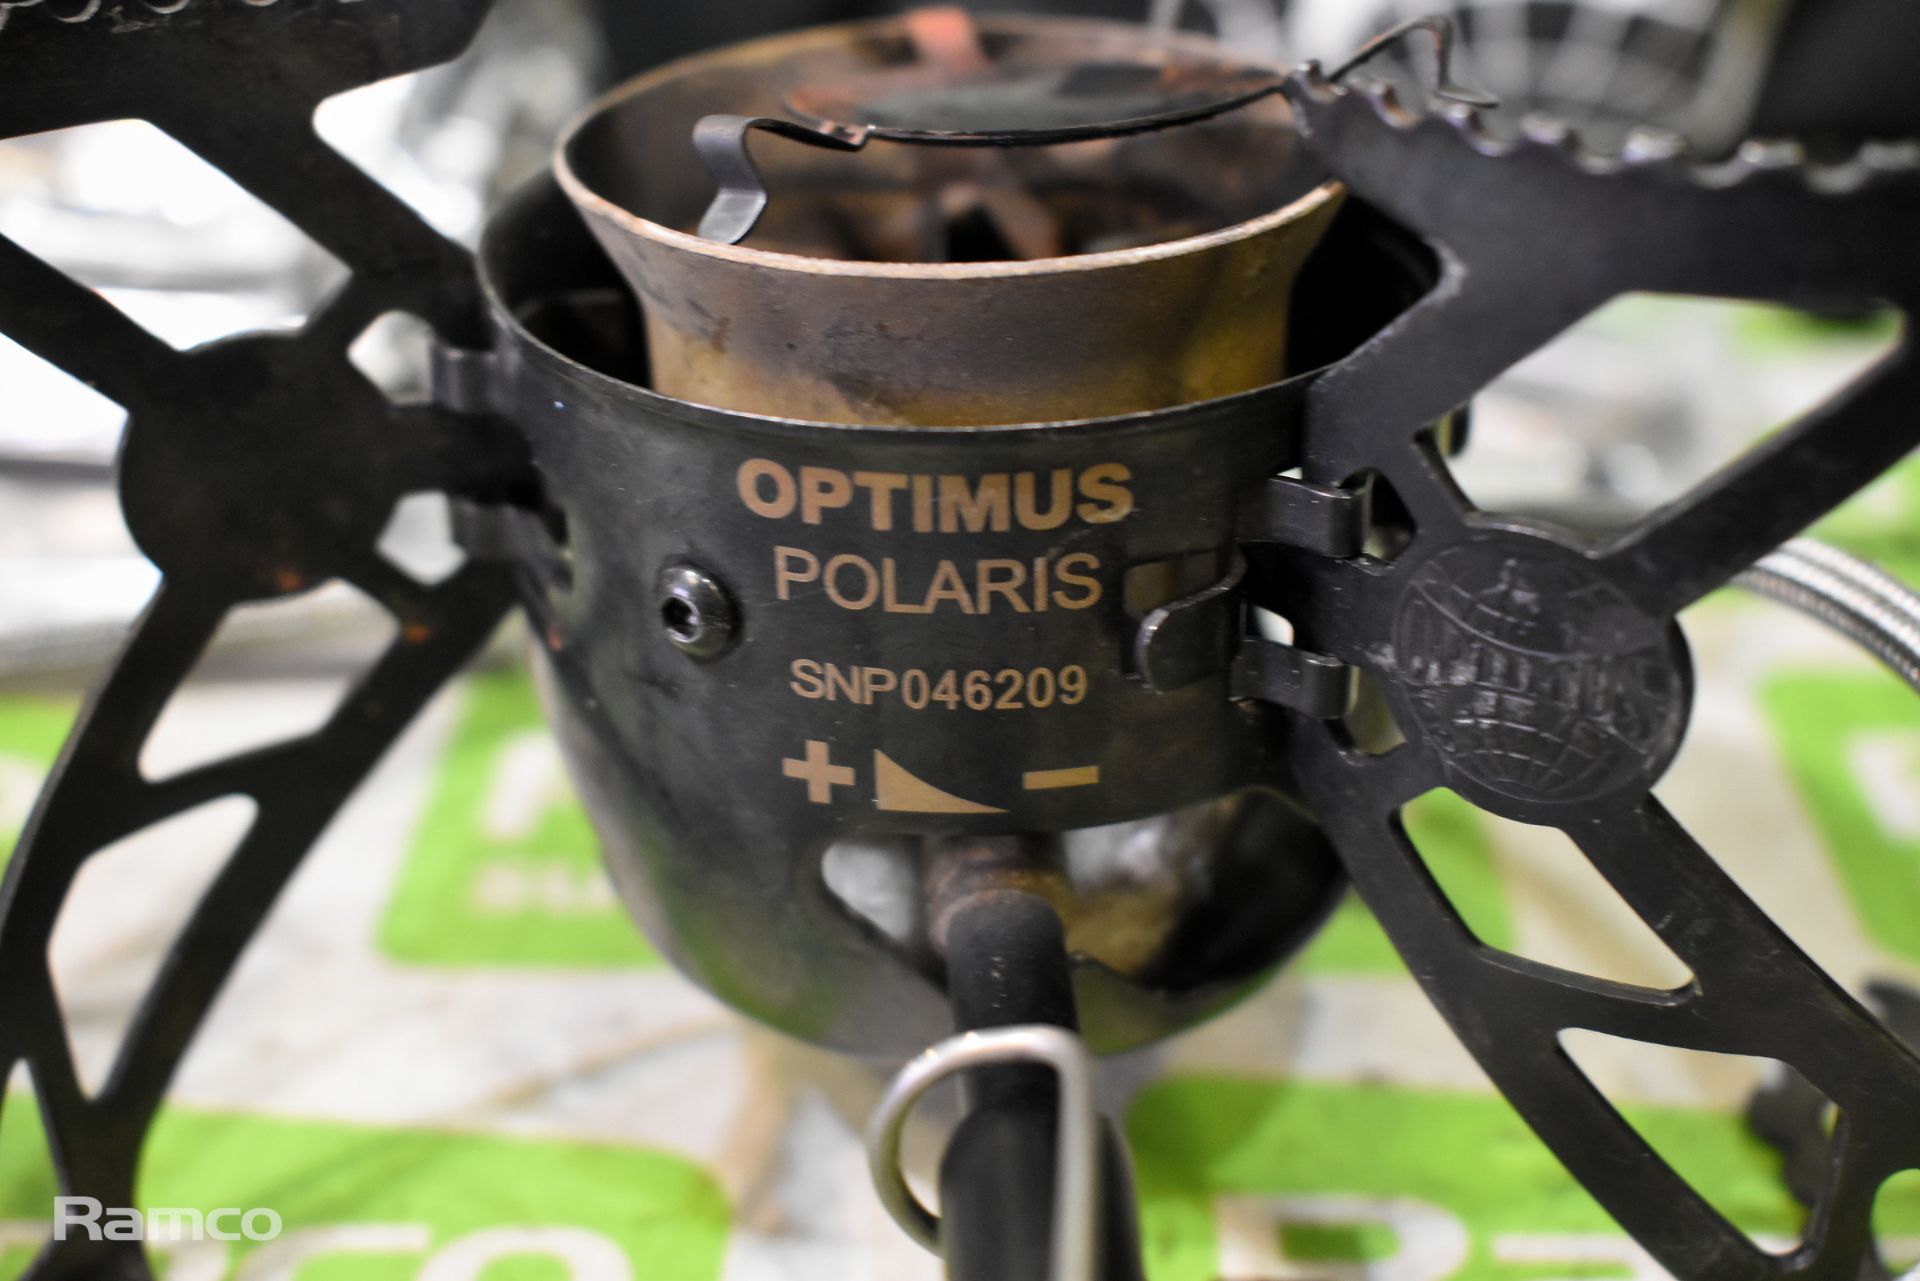 10x Optimus Polaris camping stoves with carry bag - incomplete - AS SPARES OR REPAIRS - Image 4 of 7